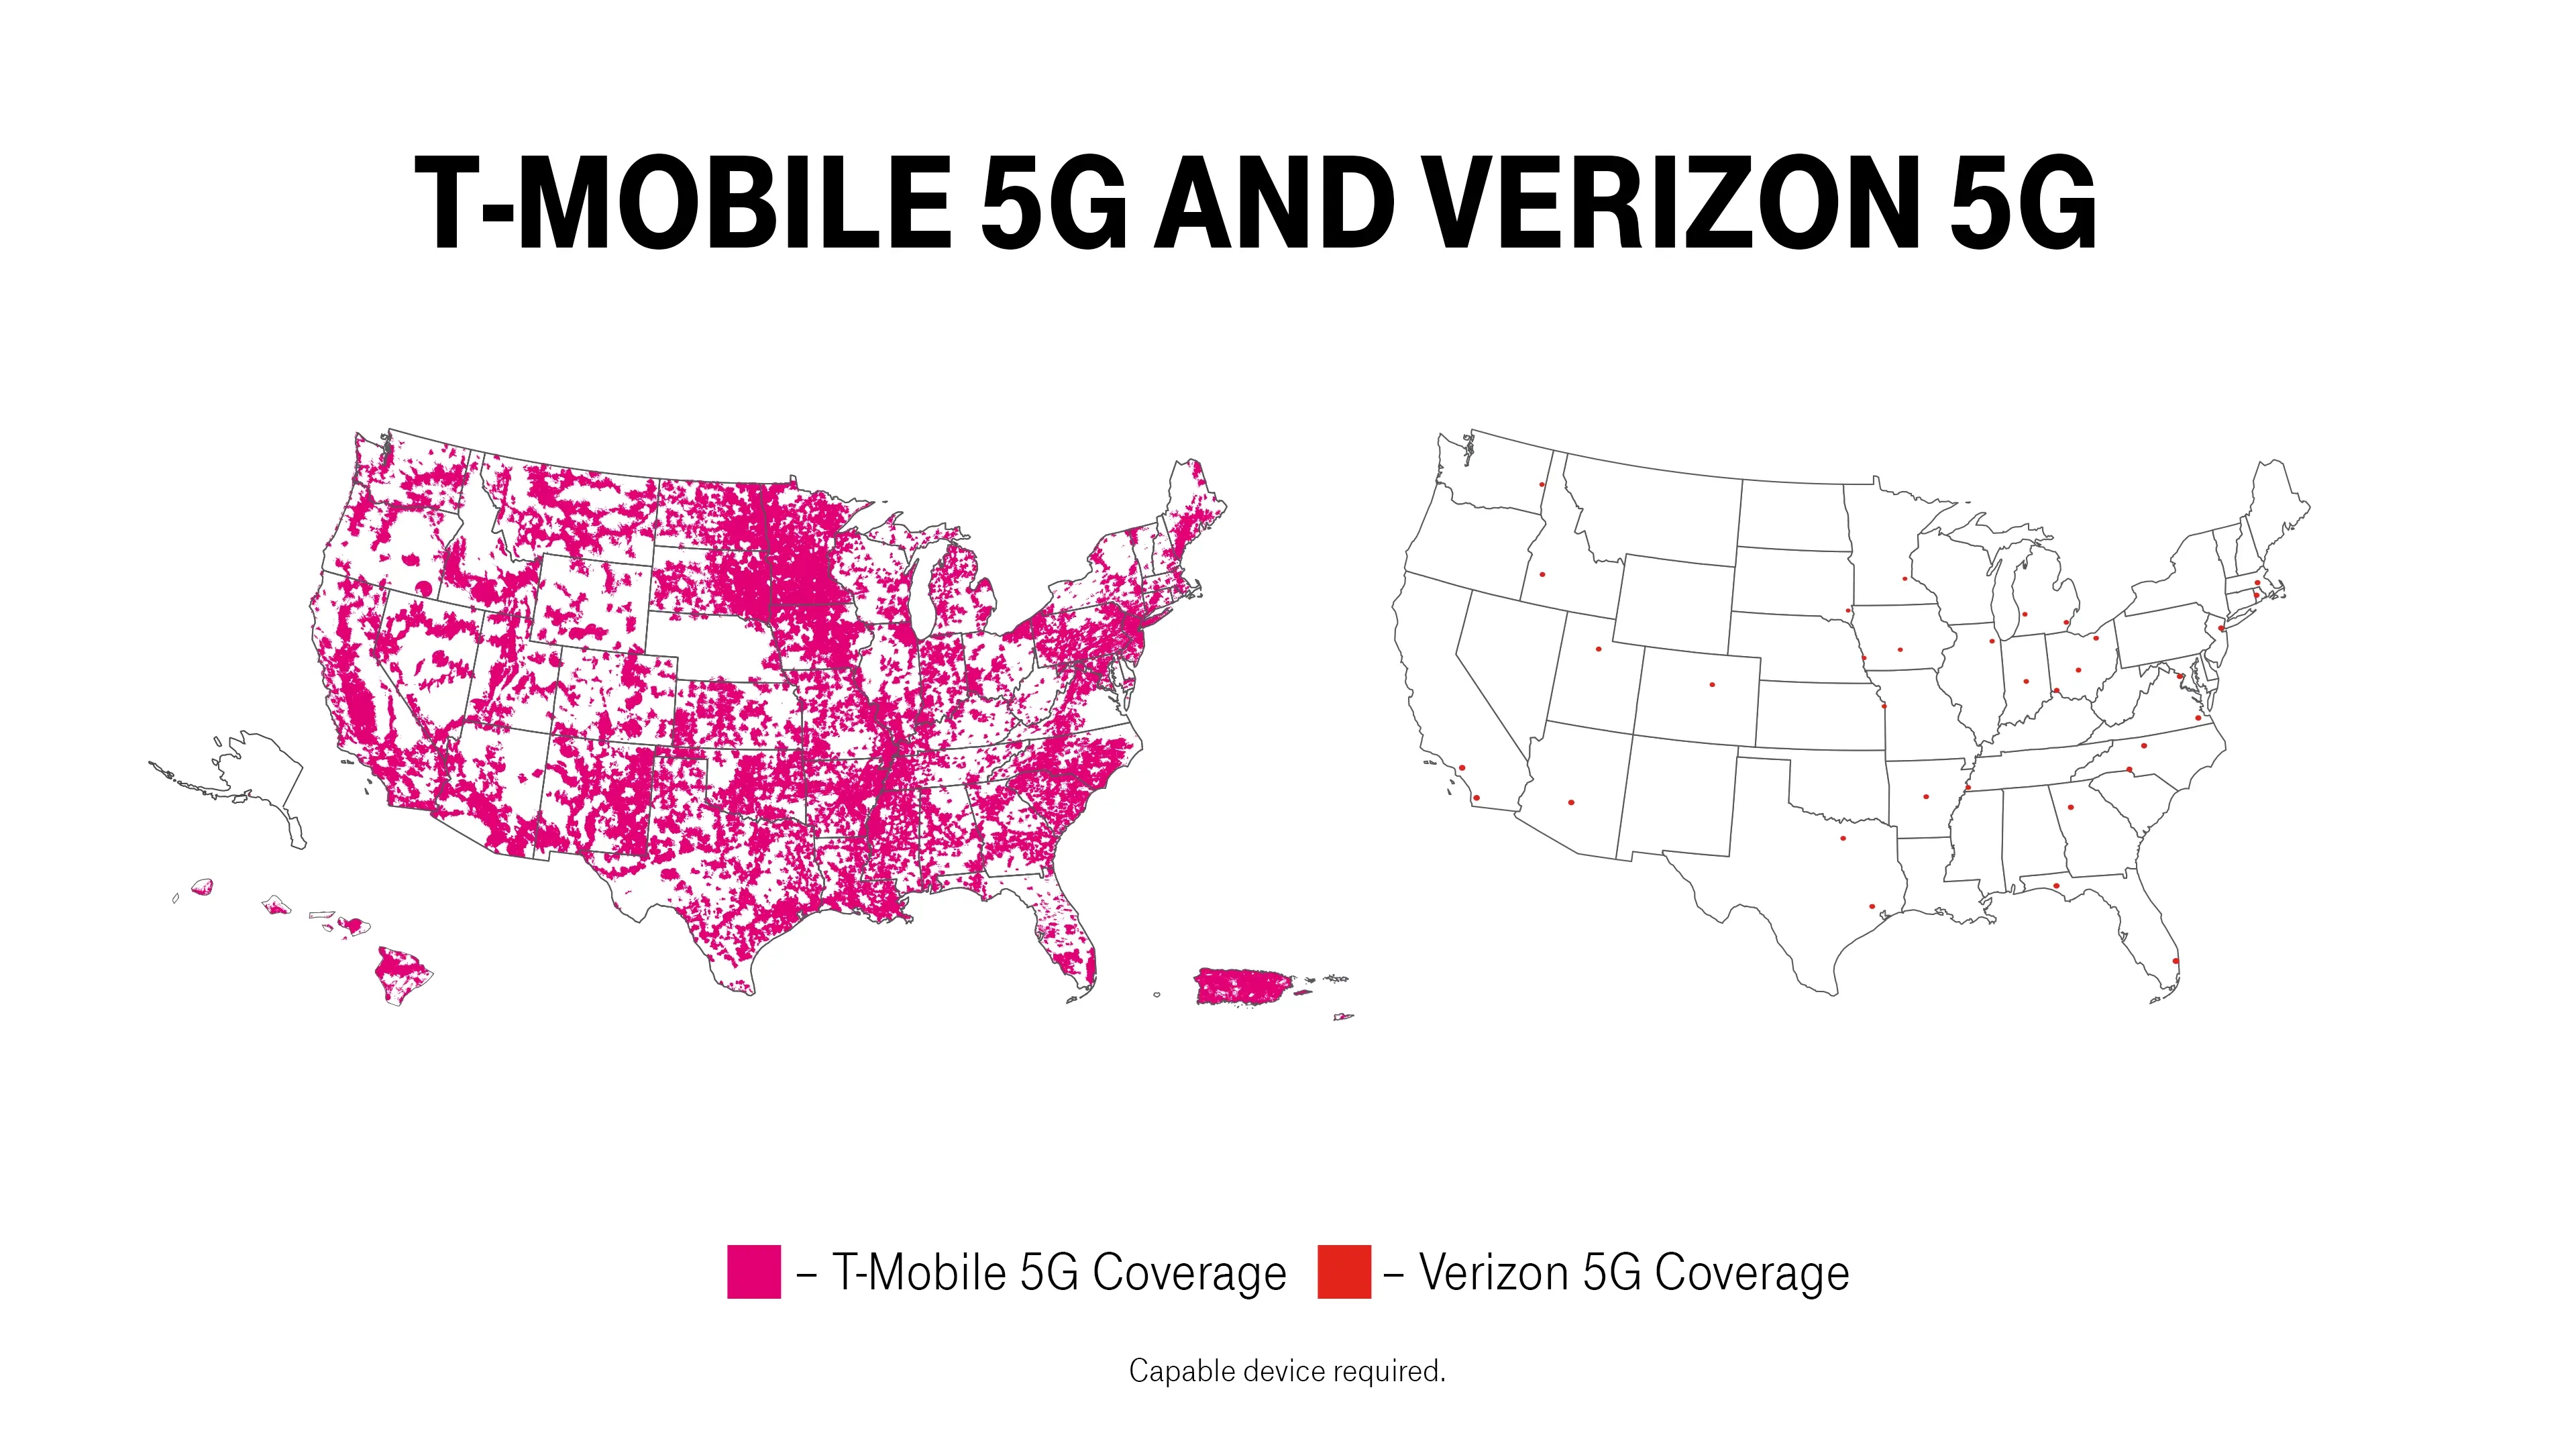 TMobile is killing Verizon and AT&T in the 5G race Beginner Tech